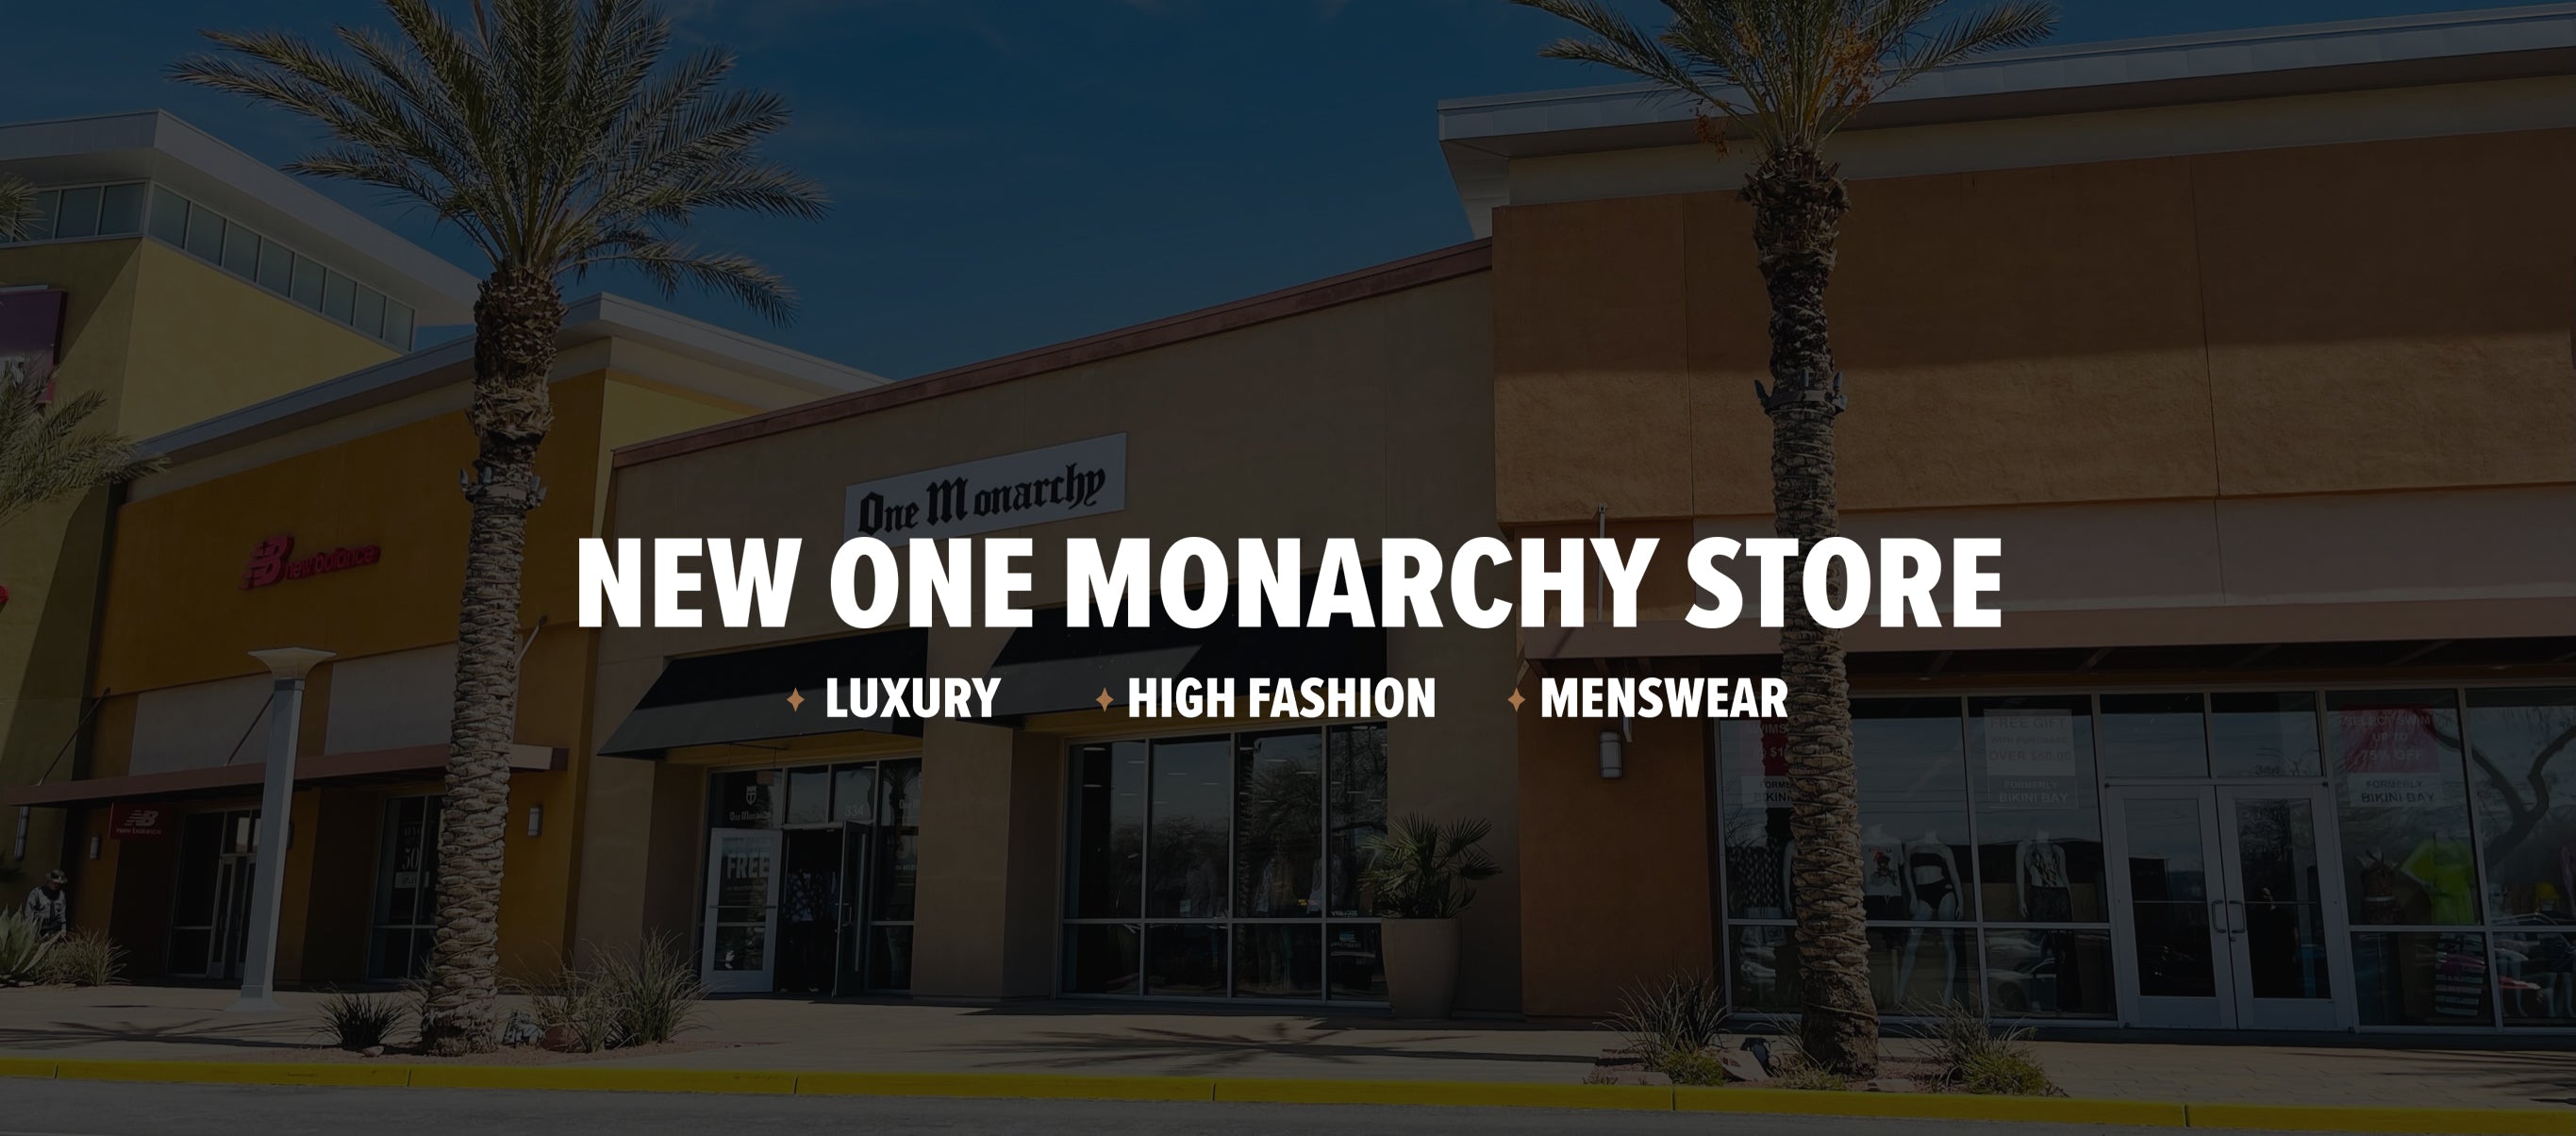 NEW ONE MONARCHY STORE